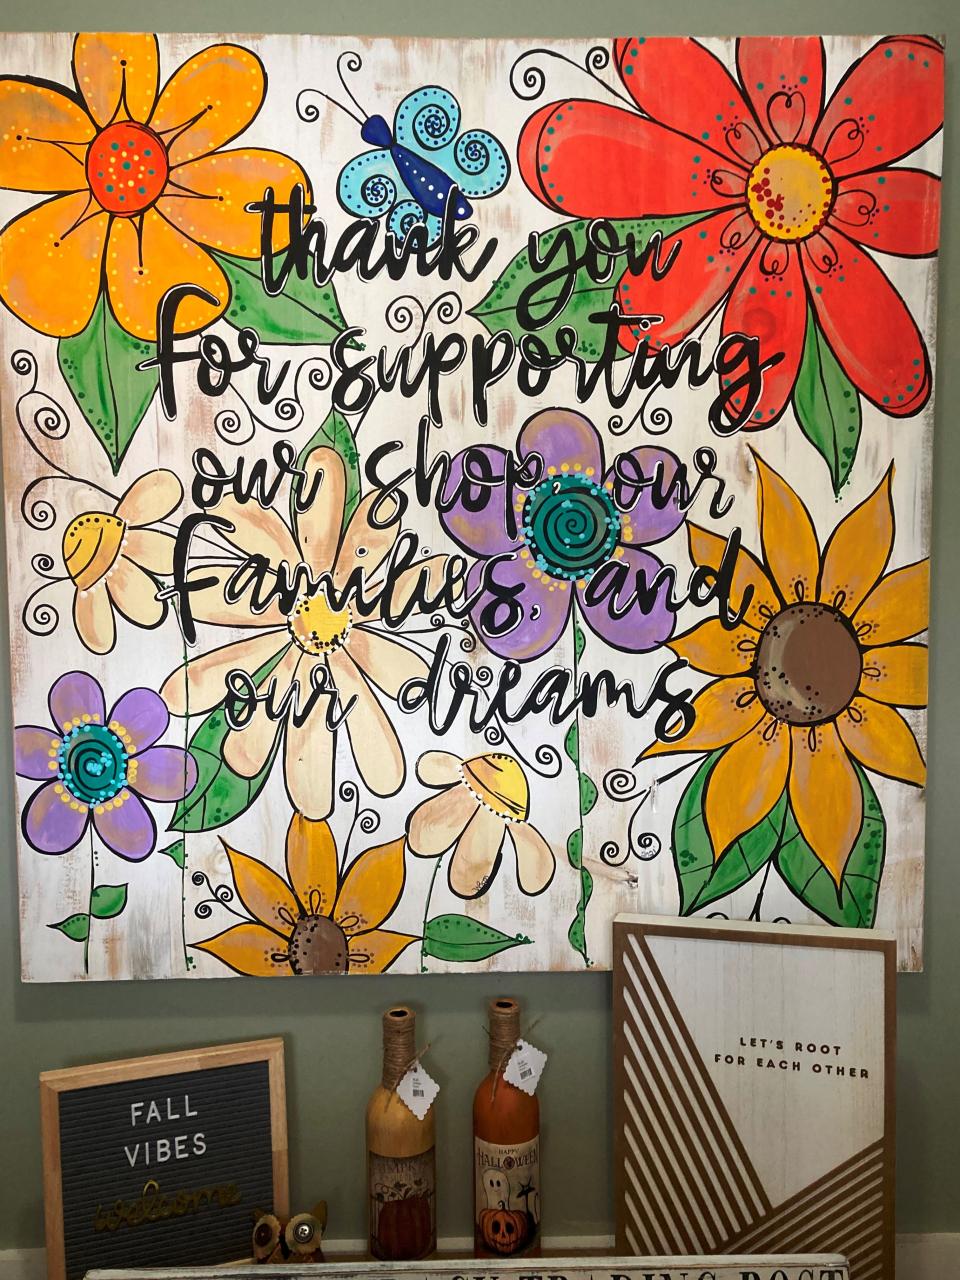 Colorful and heartfelt messaging on signs in the store. Let's root for each other!